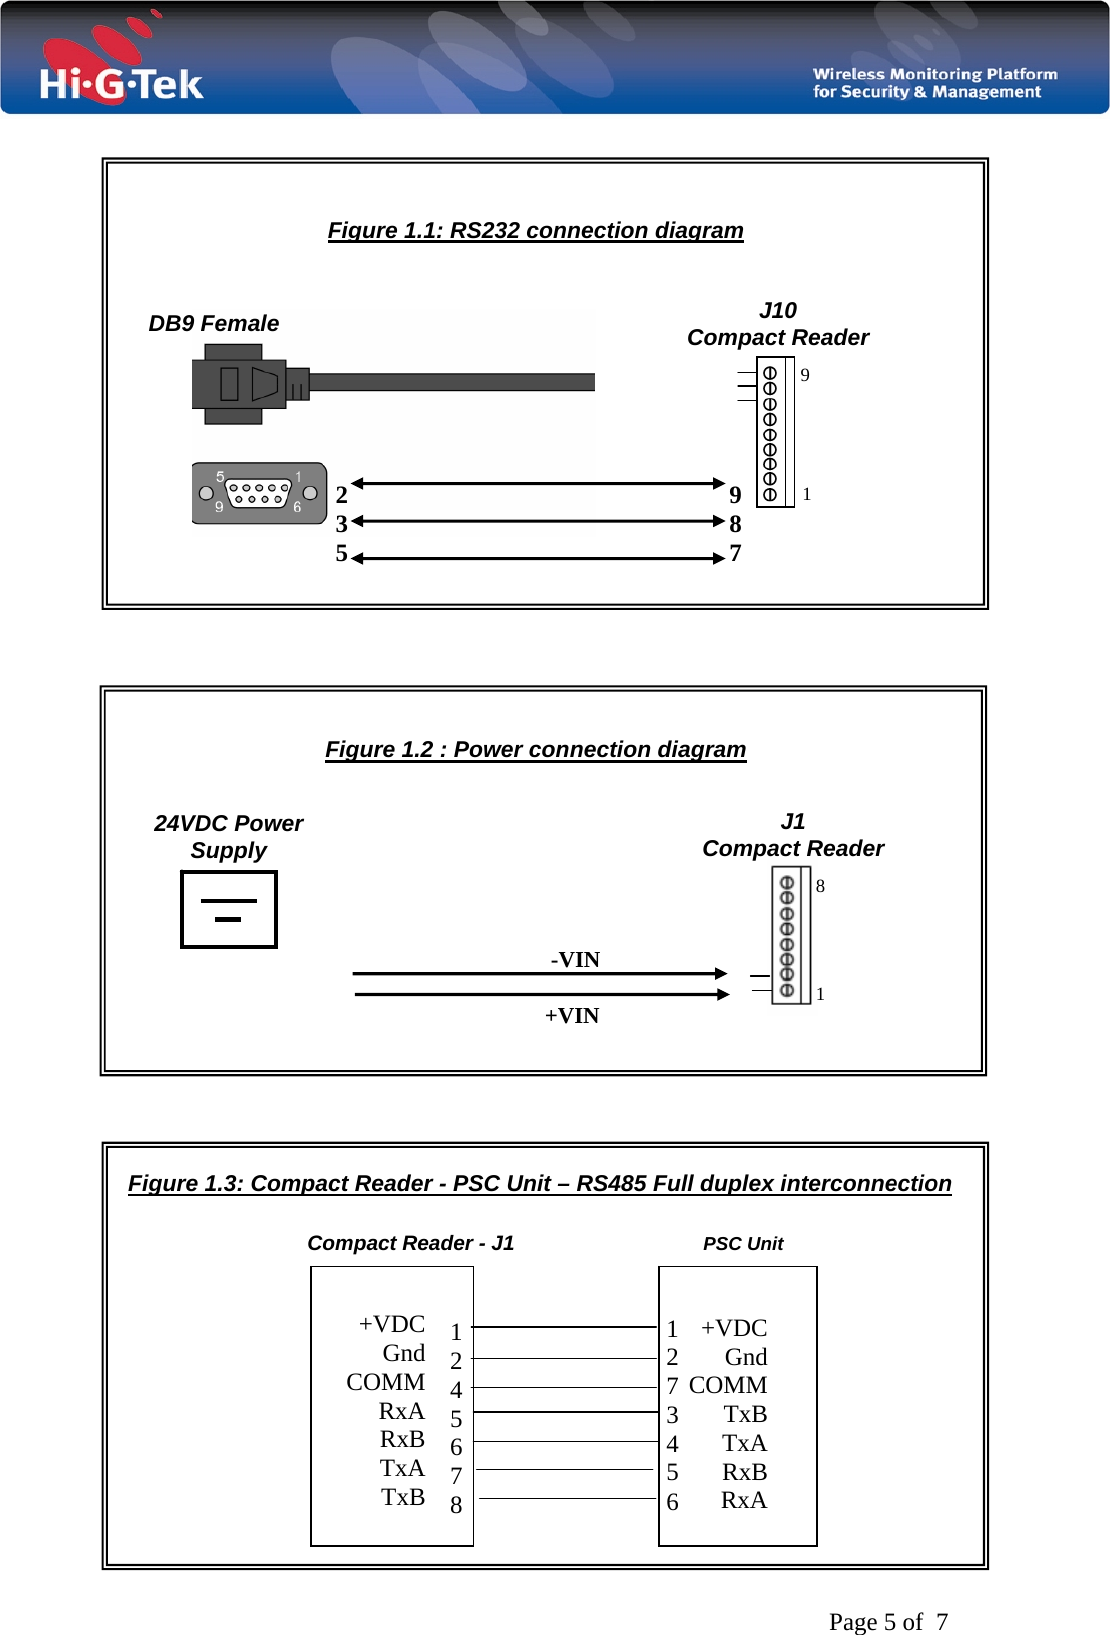   Page 5 of  7     Figure 1.1: RS232 connection diagram                     Figure 1.2 : Power connection diagram                                    Figure 1.3: Compact Reader - PSC Unit – RS485 Full duplex interconnection               9  8  7  2  3  5  J10 Compact Reader DB9 Female 1 9 J1  Compact Reader 1  8 24VDC Power Supply +VIN-VINCompact Reader - J1 PSC Unit 1  2  4  5  6  7  8  1  2  7  3  4  5  6 +VDC   Gnd COMM   RxA RxB  TxA TxB +VDC   Gnd  COMM   TxB TxA RxB  RxA 